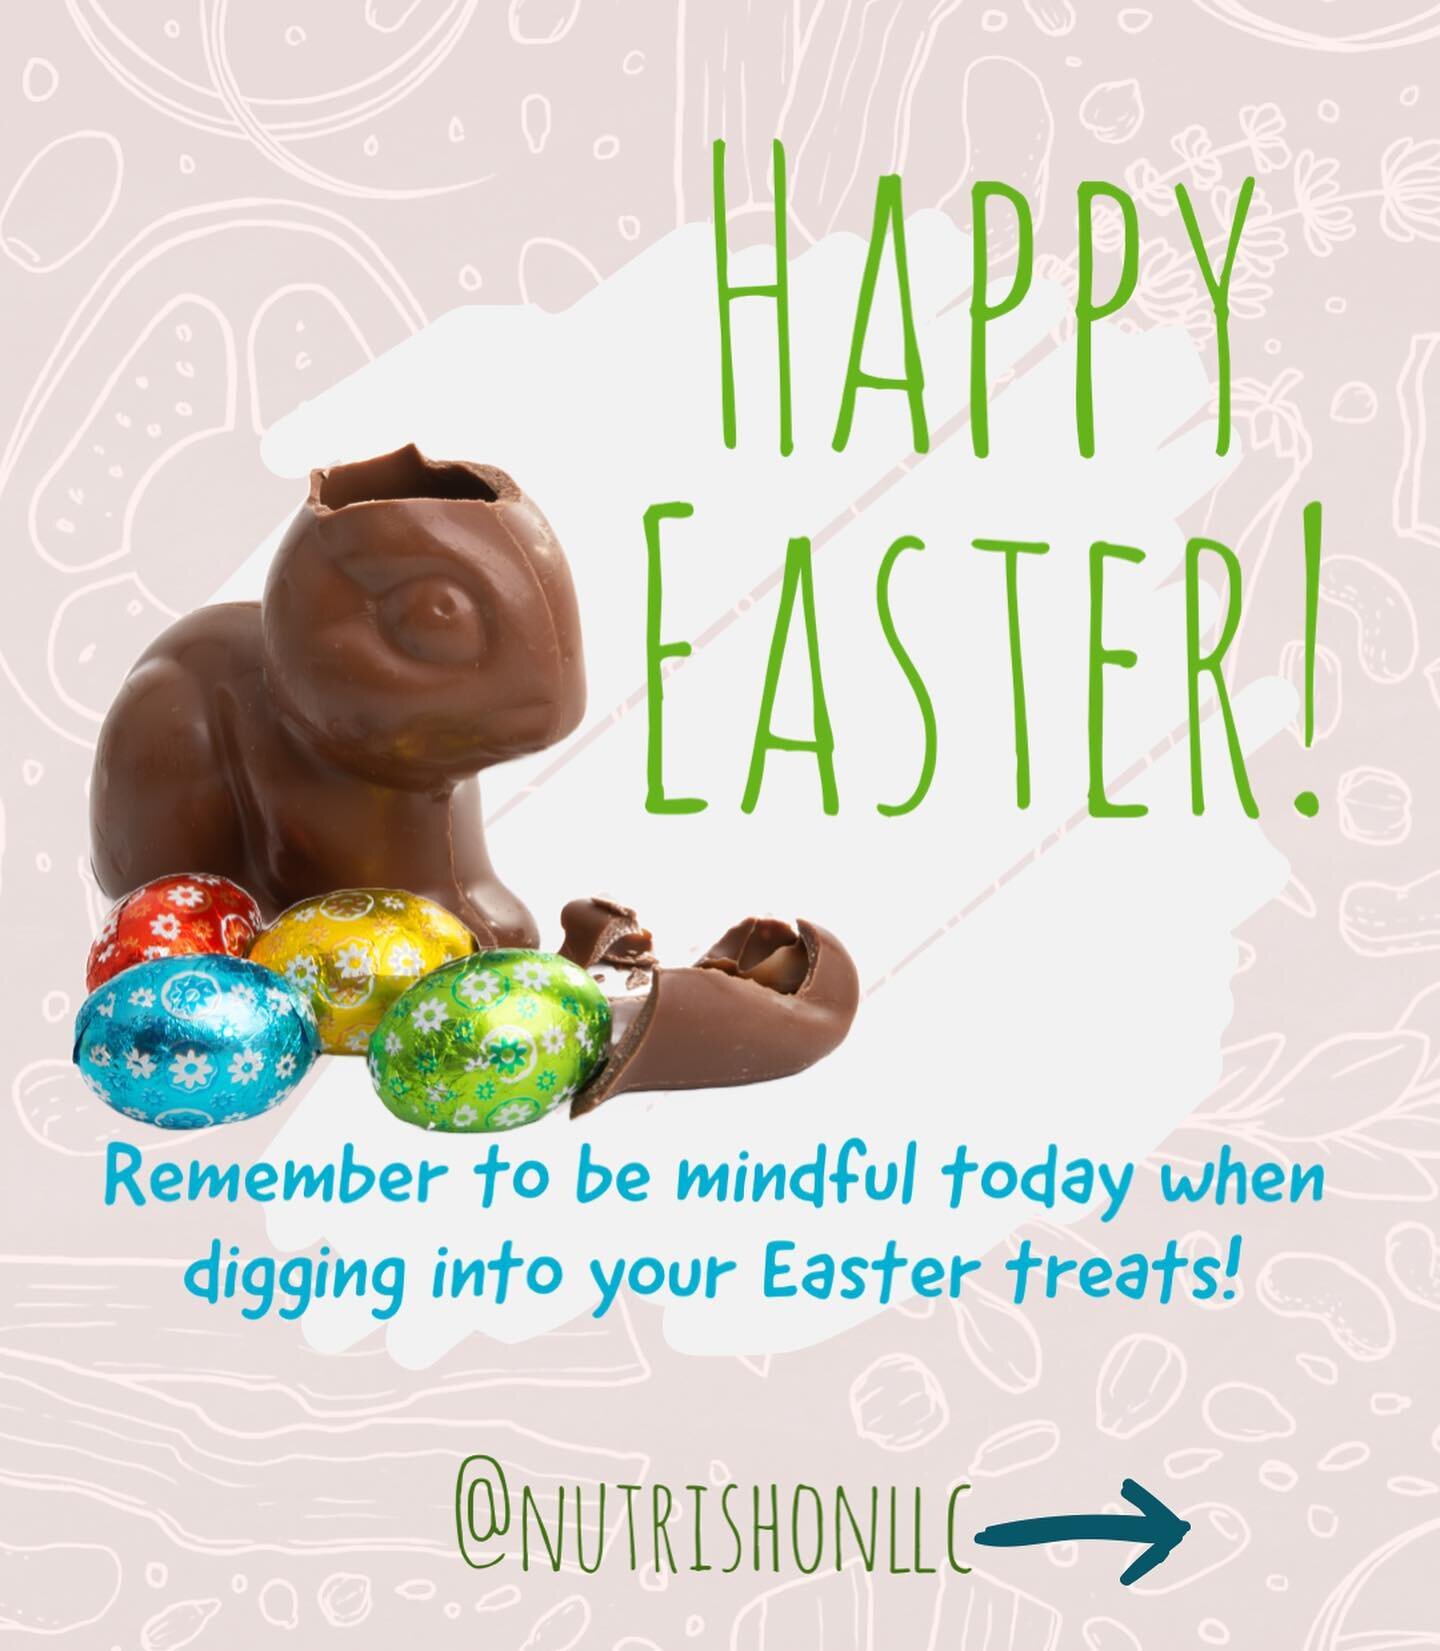 Happy Easter, to everyone who celebrates! 🌷🐰🥳

-
For personalized nutrition counseling, click the link in my bio to get started on your wellness journey! 
I&rsquo;m currently accepting new clients! 🙂
I look forward to meeting you!
Cheers!
#nutrit